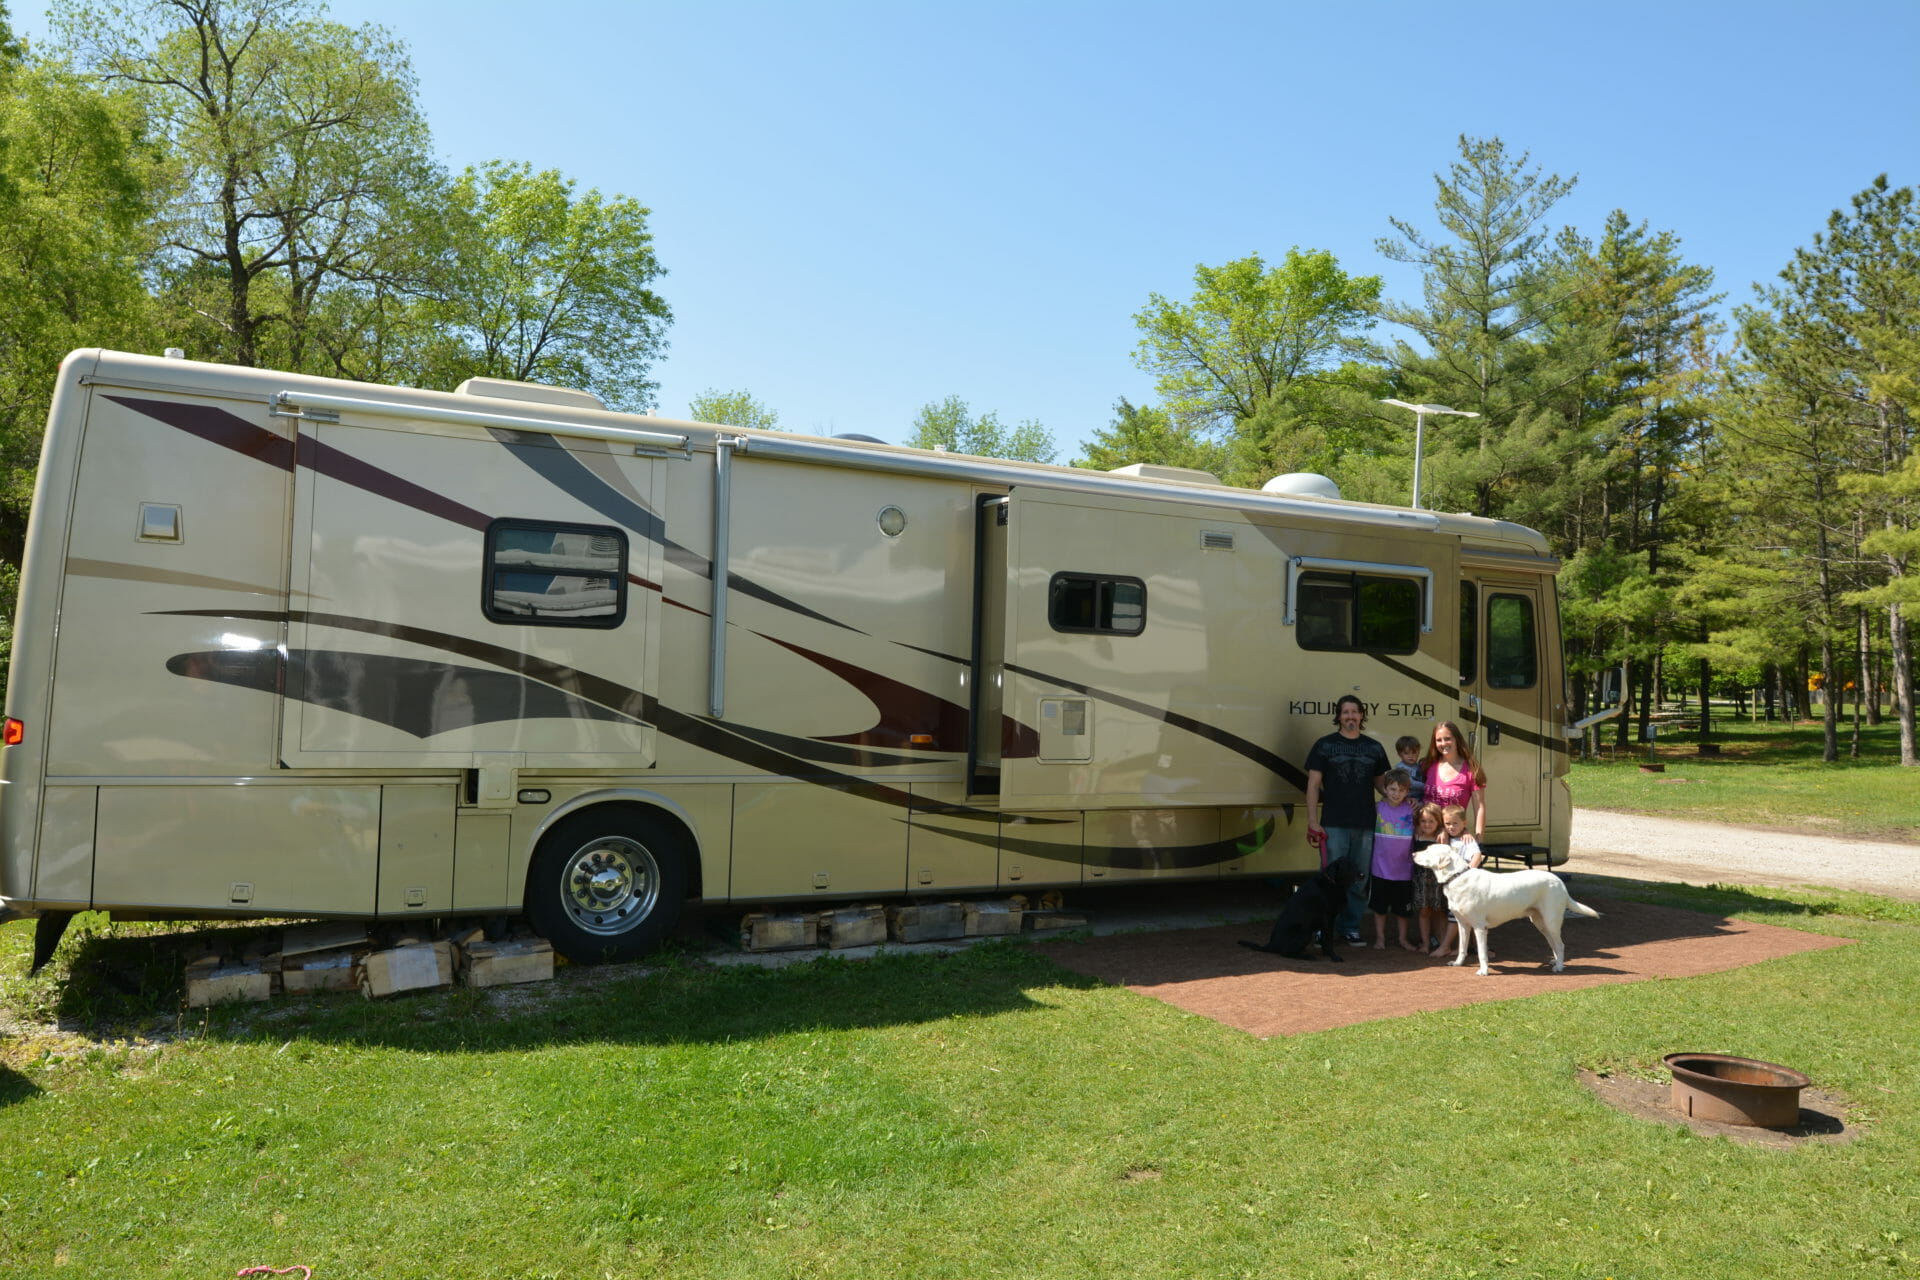 10 Things We've Learned After A Year of Traveling In An RV - Crazy